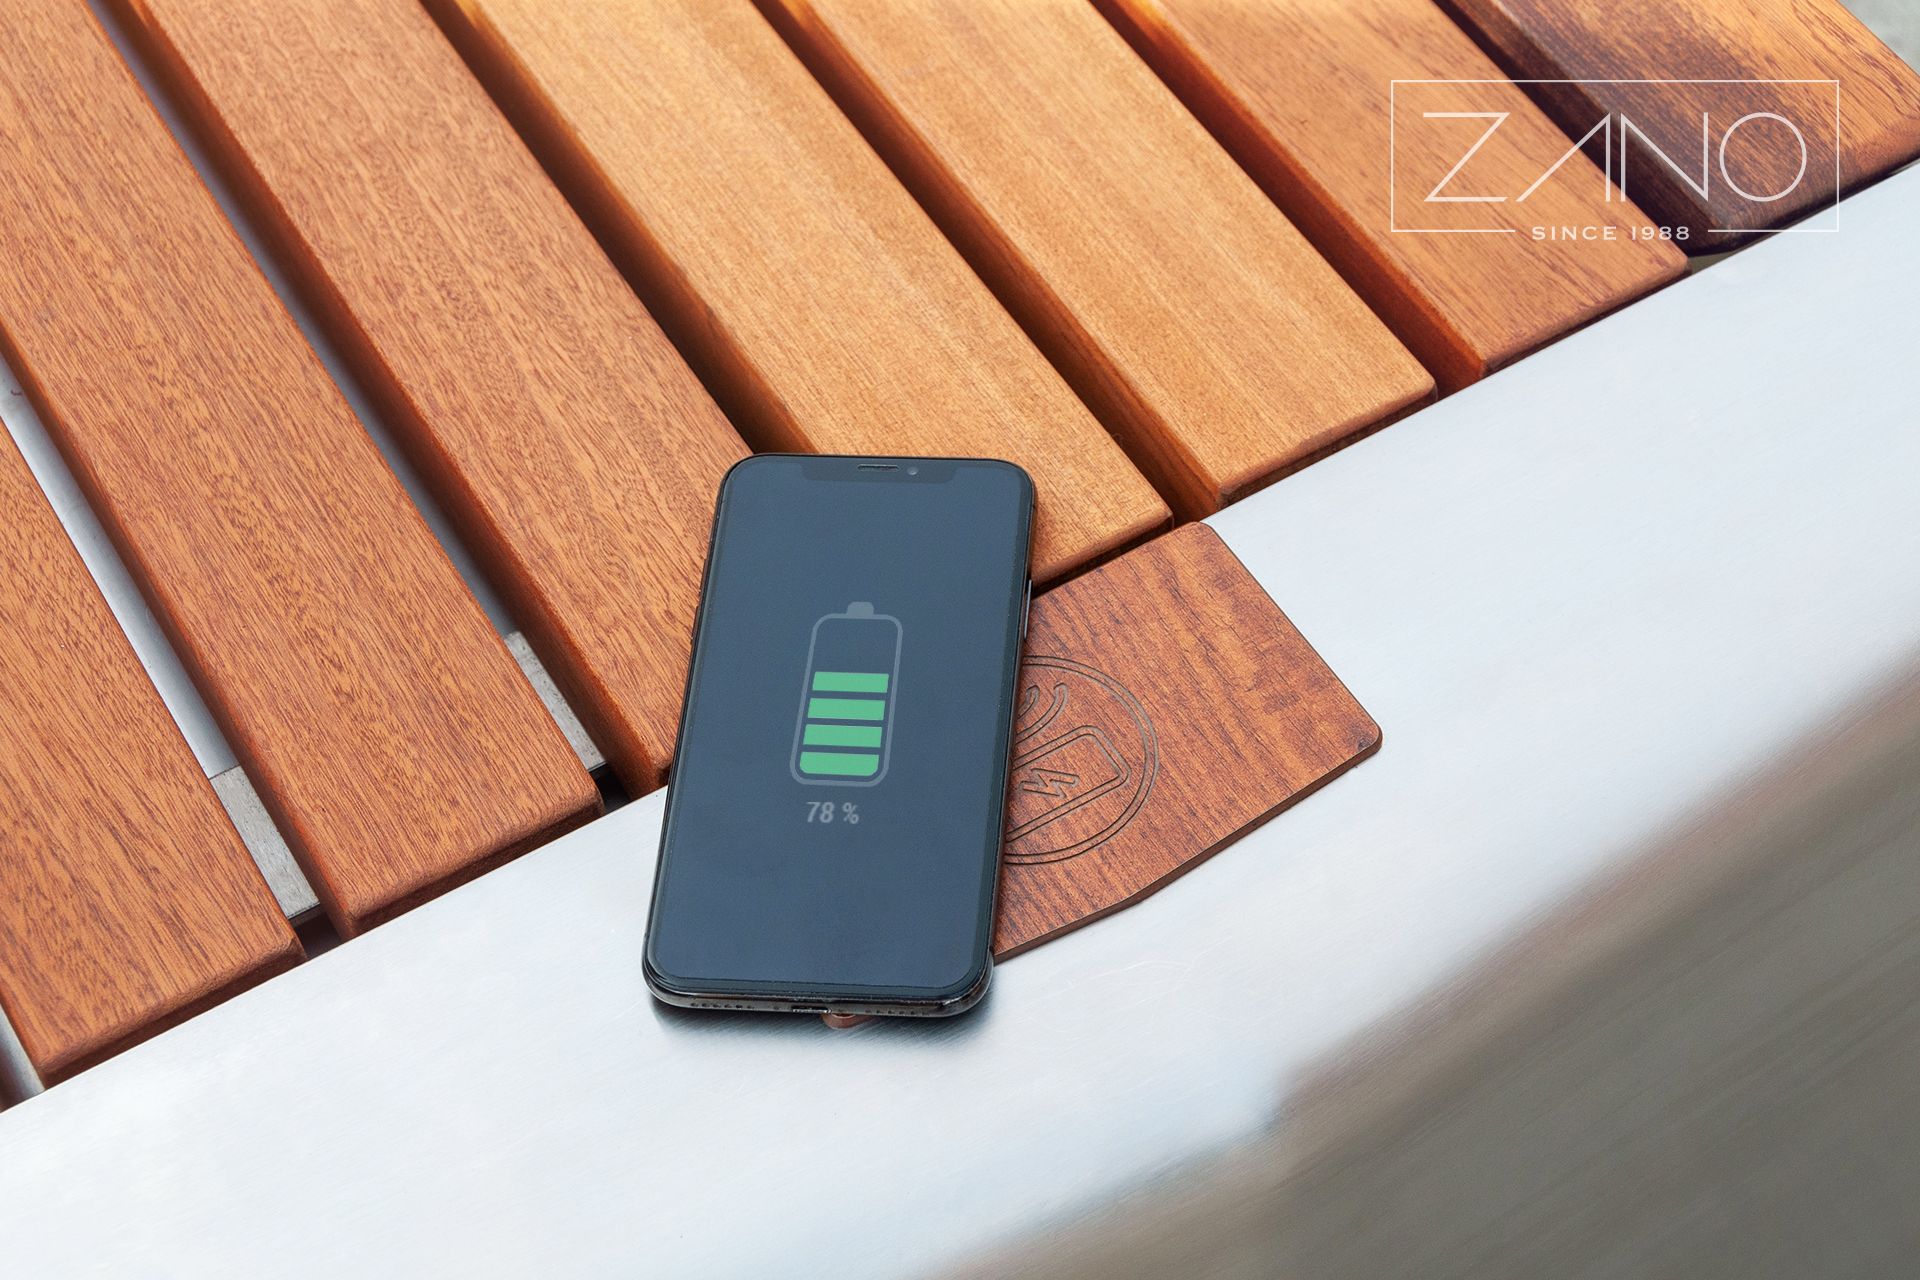 Wireless charging of the phone in the bench